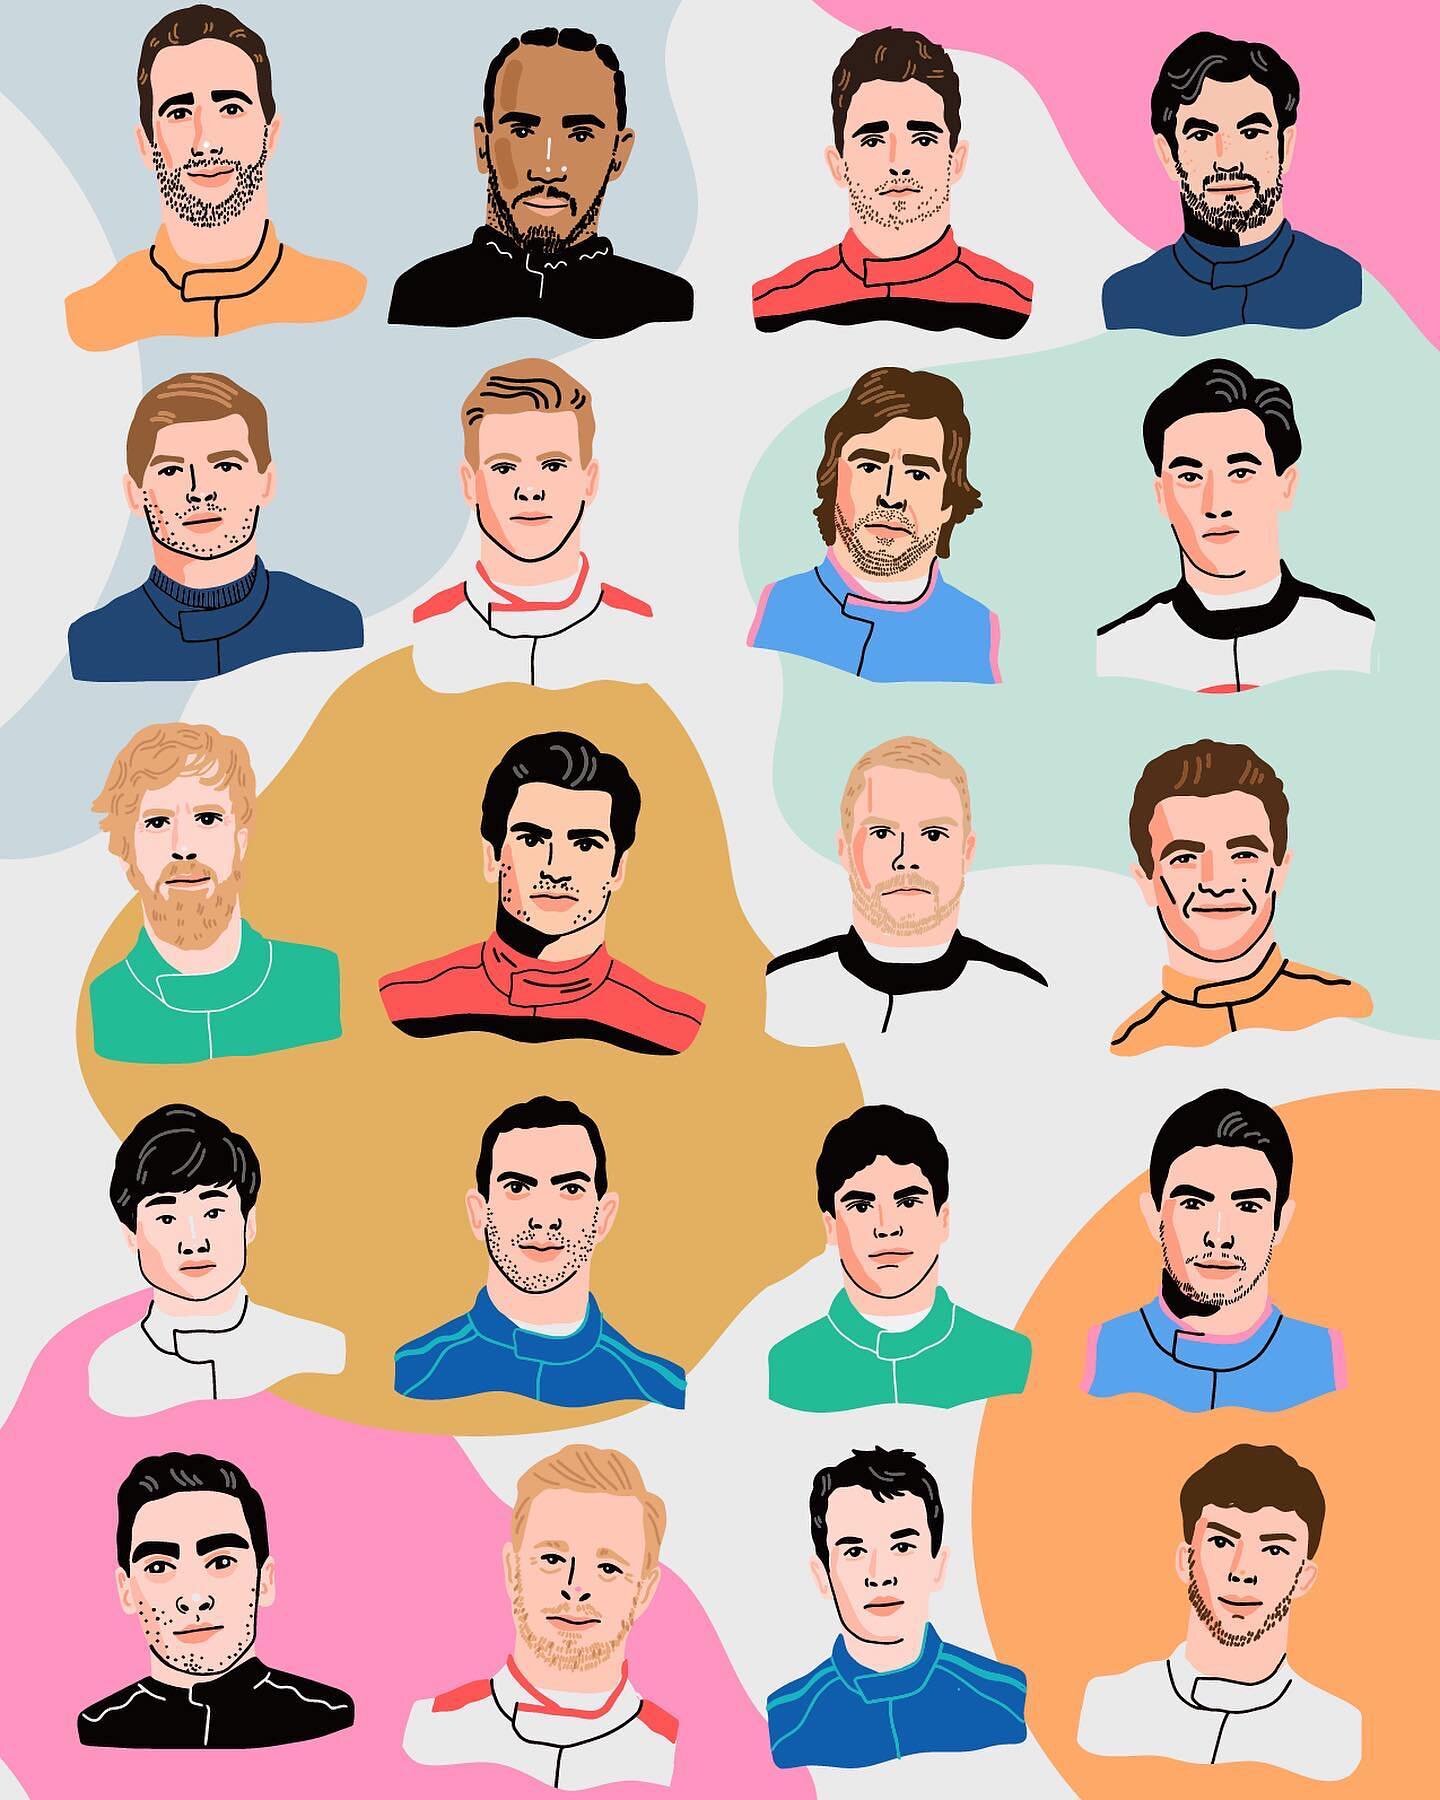 Happy race weekend! Some @f1 portraits from the 2022 driver lineup. Box box, push push, copy copy.